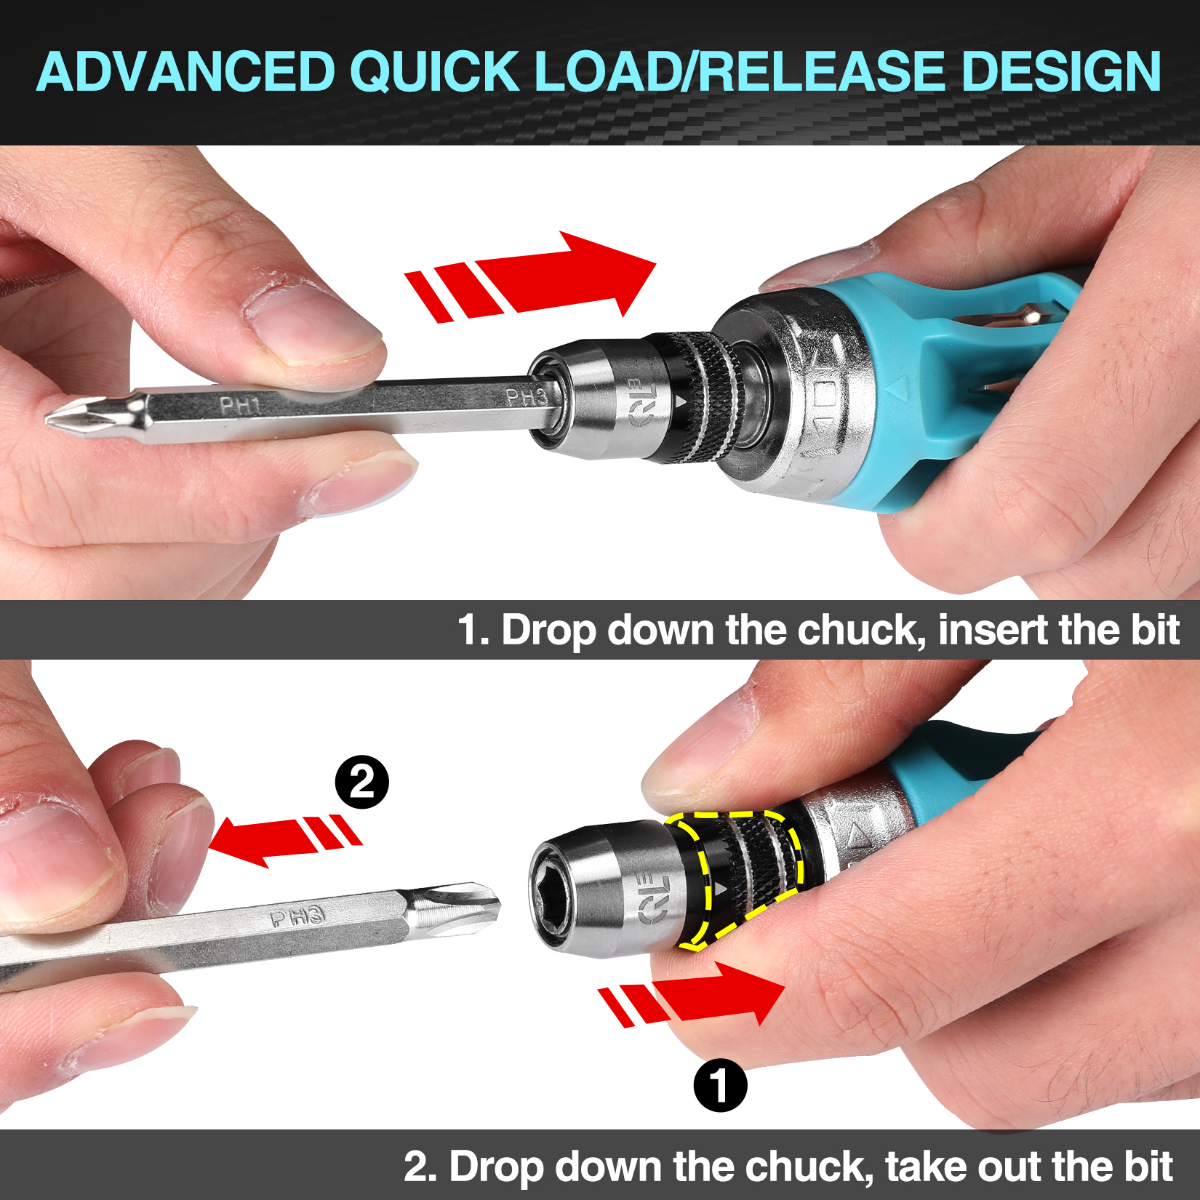 DURATECH Ratcheting Screwdriver